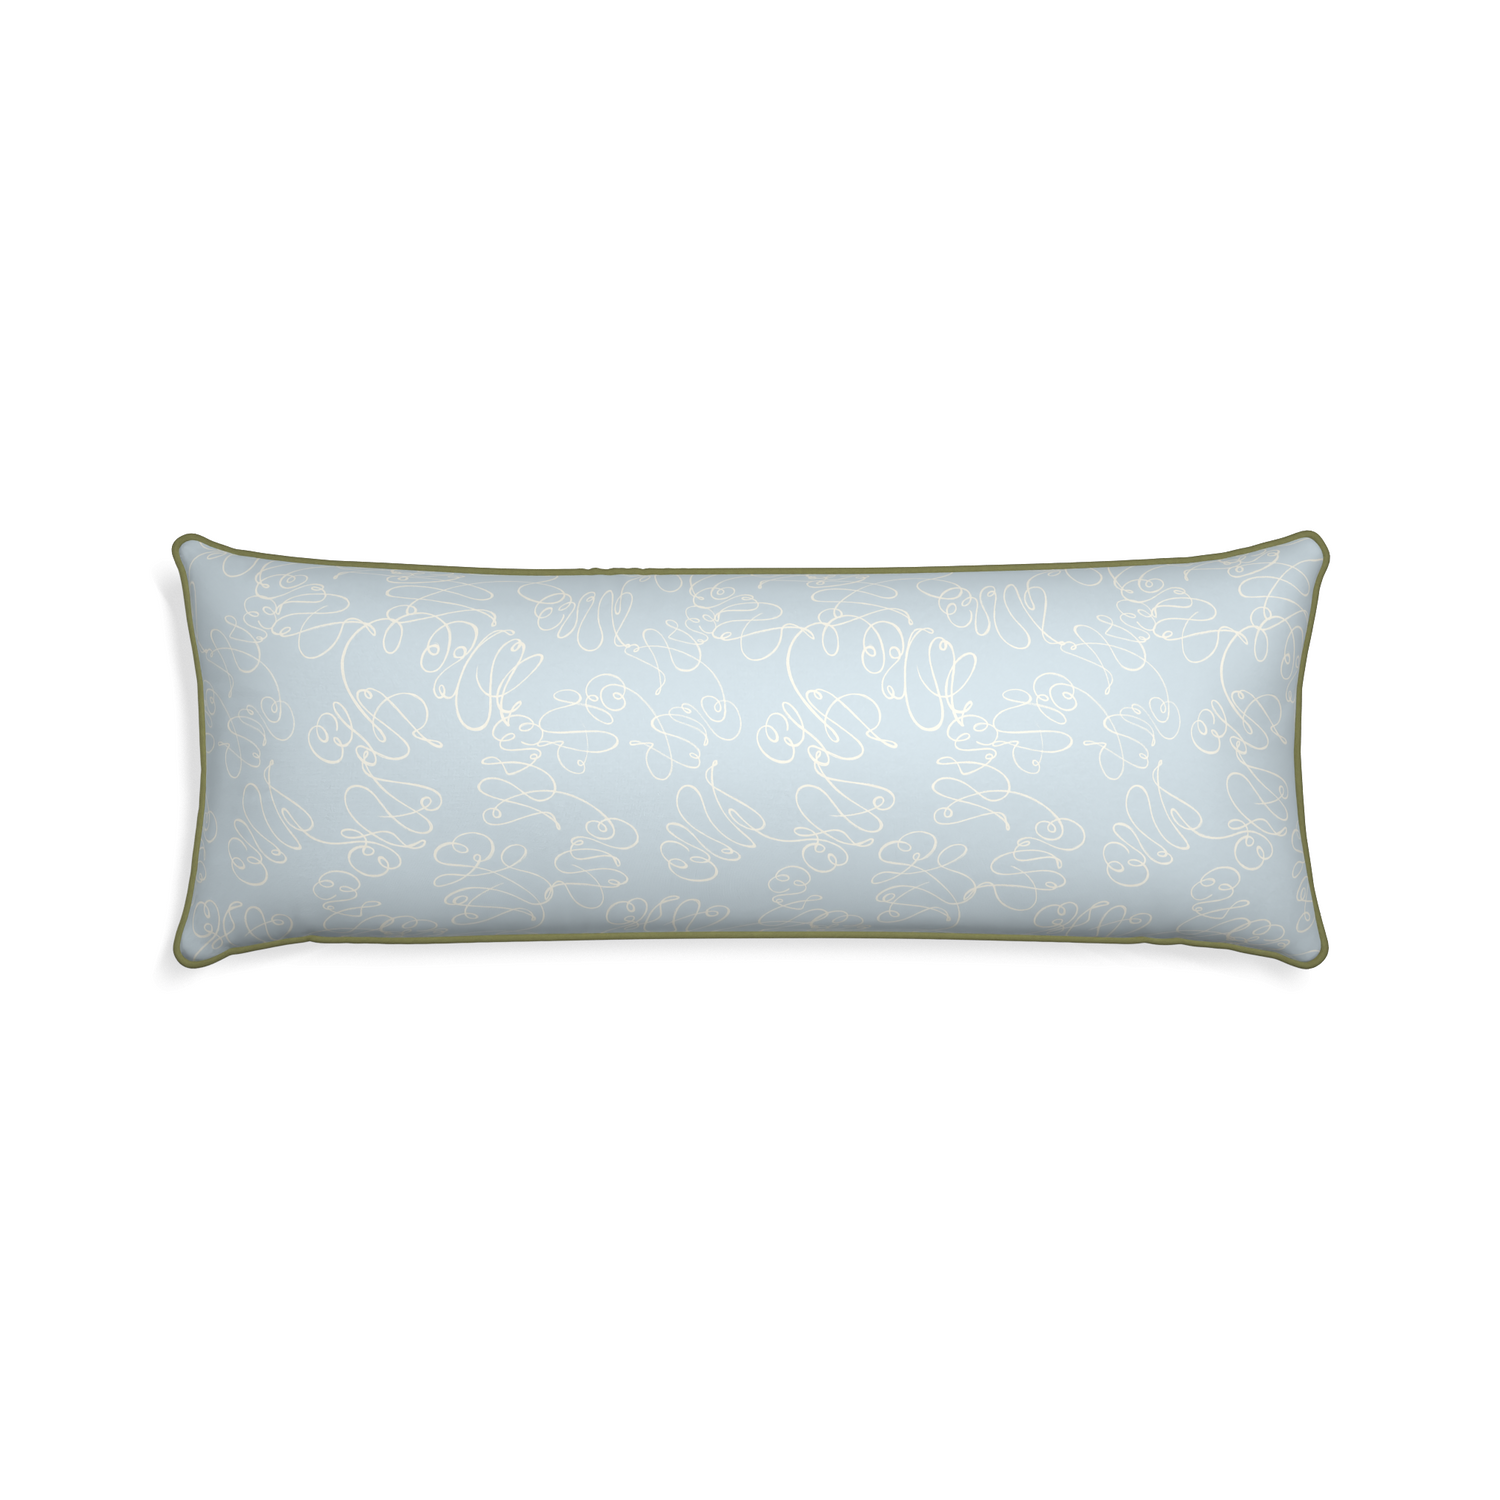 Xl-lumbar mirabella custom pillow with moss piping on white background